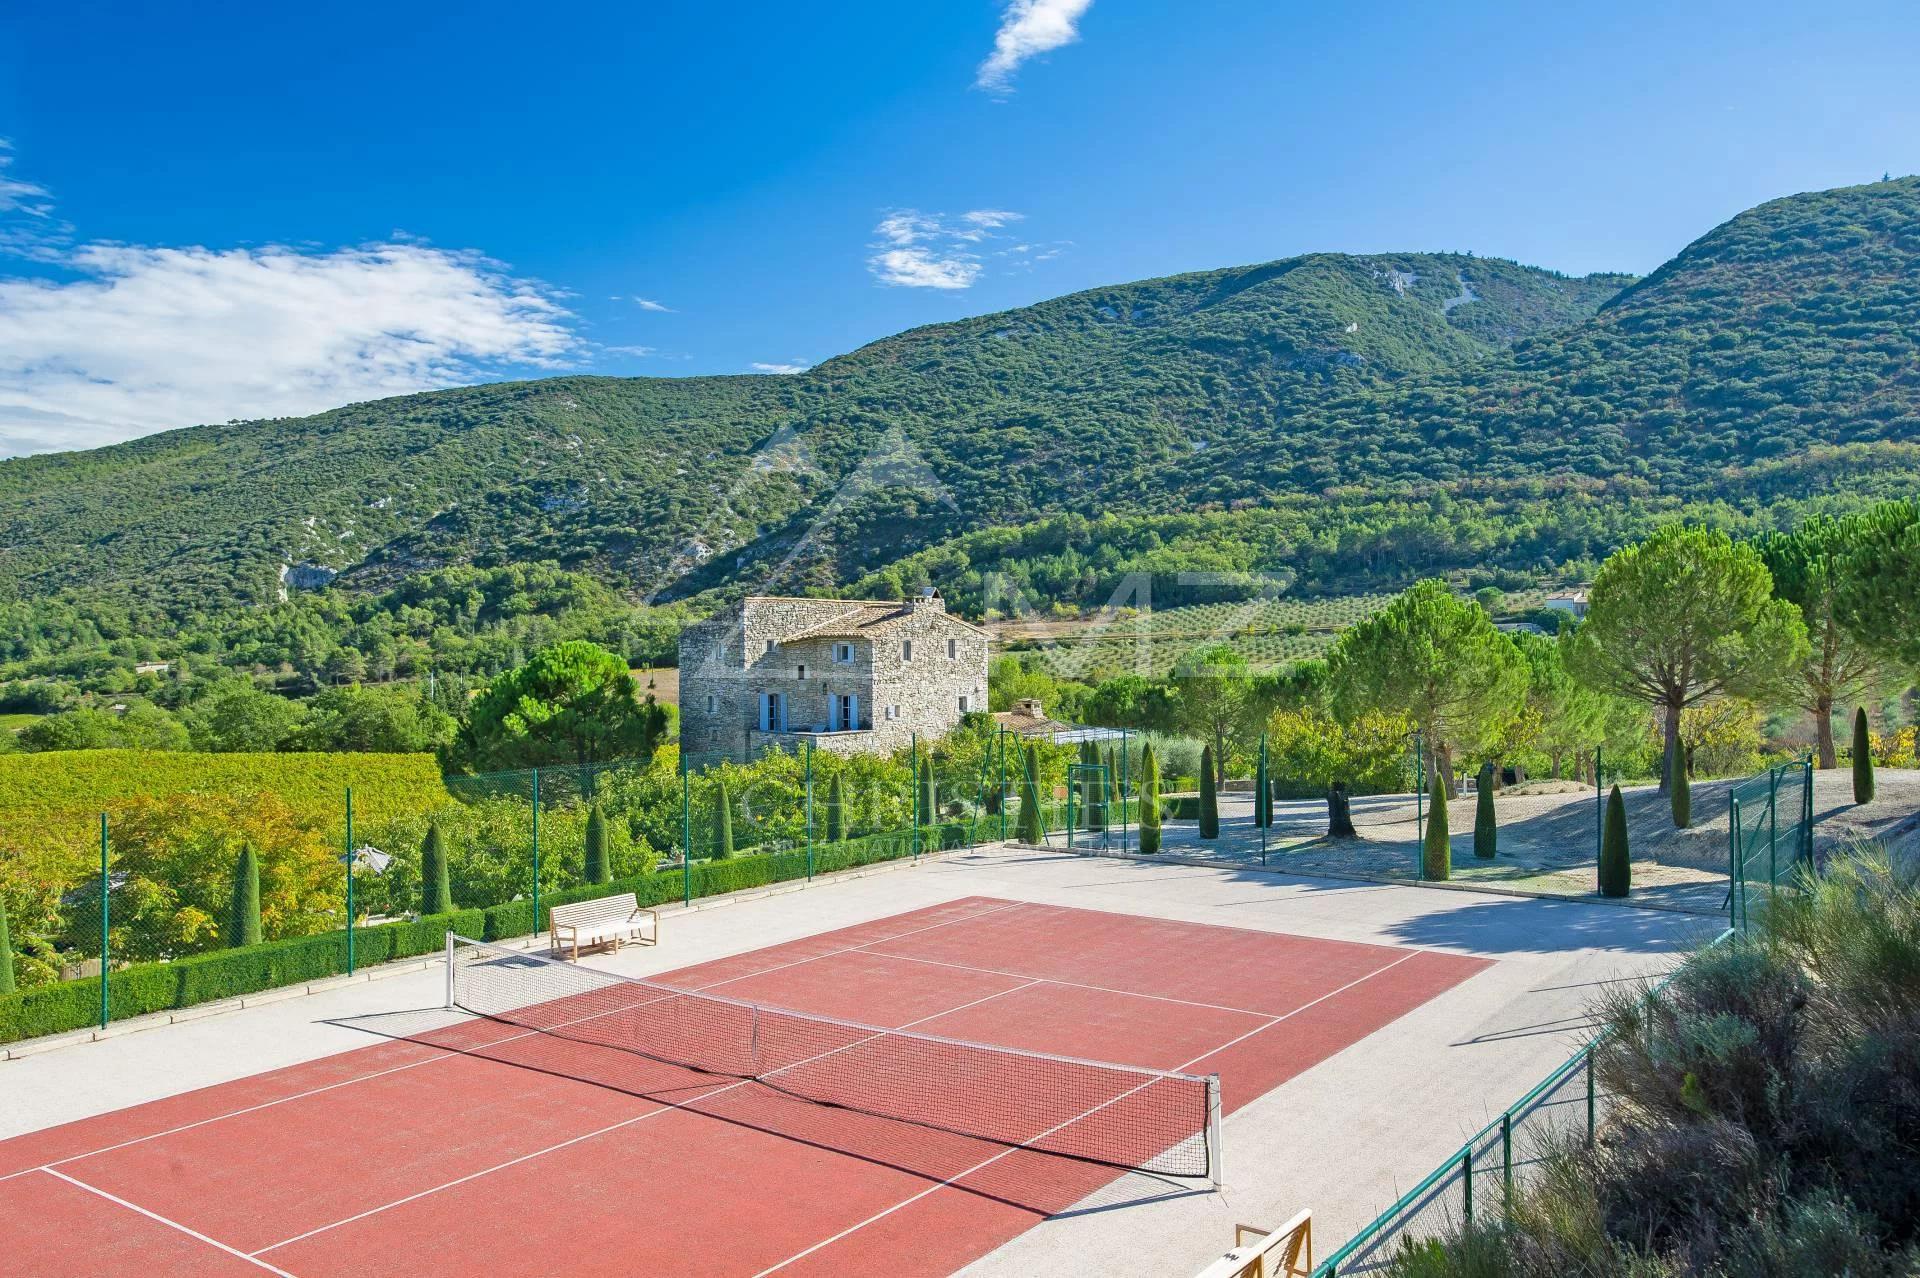 Bonnieux - Gorgeous property with tennis court and high level of amenities